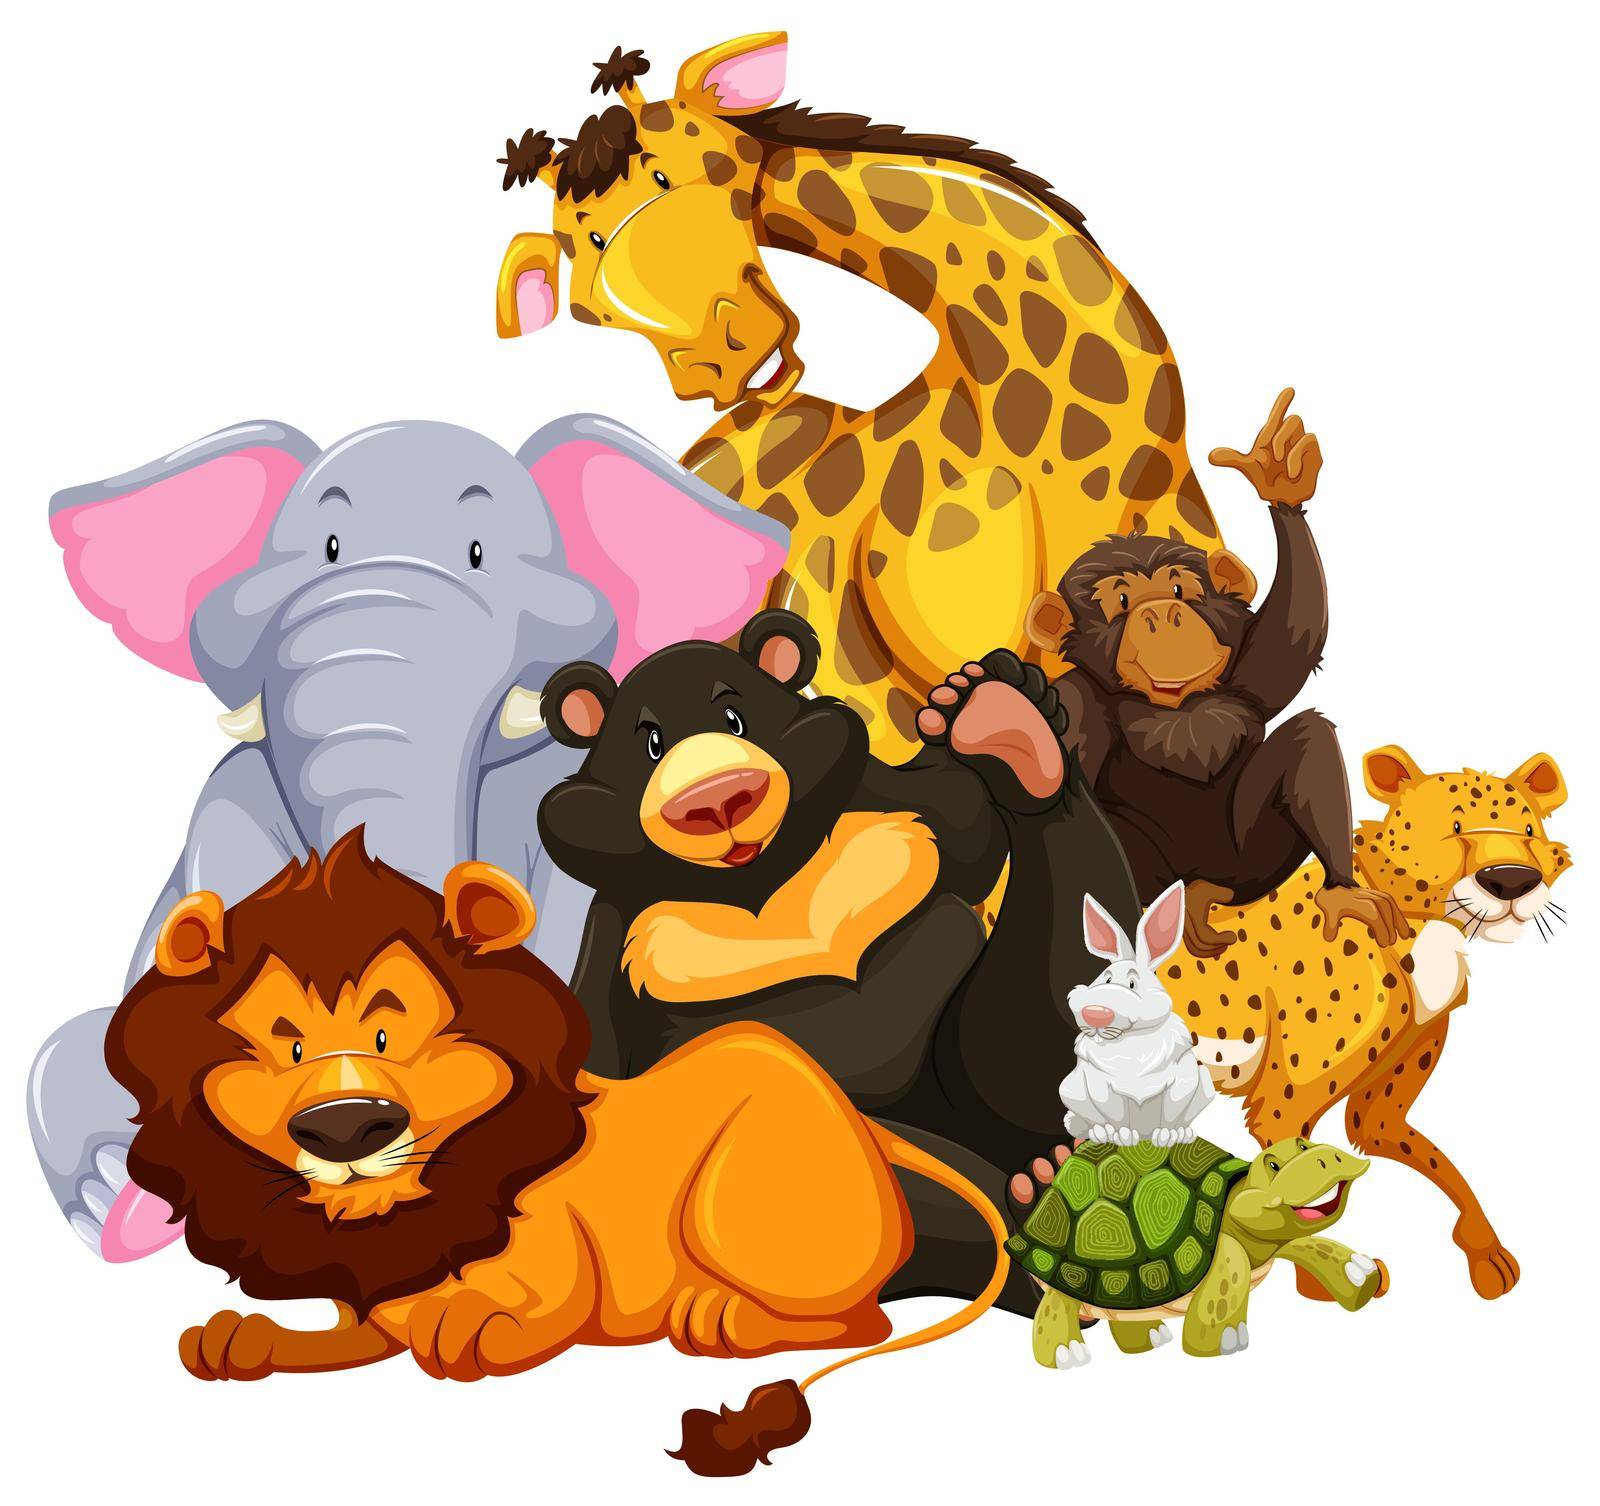 Group of wild animals sitting together on white background